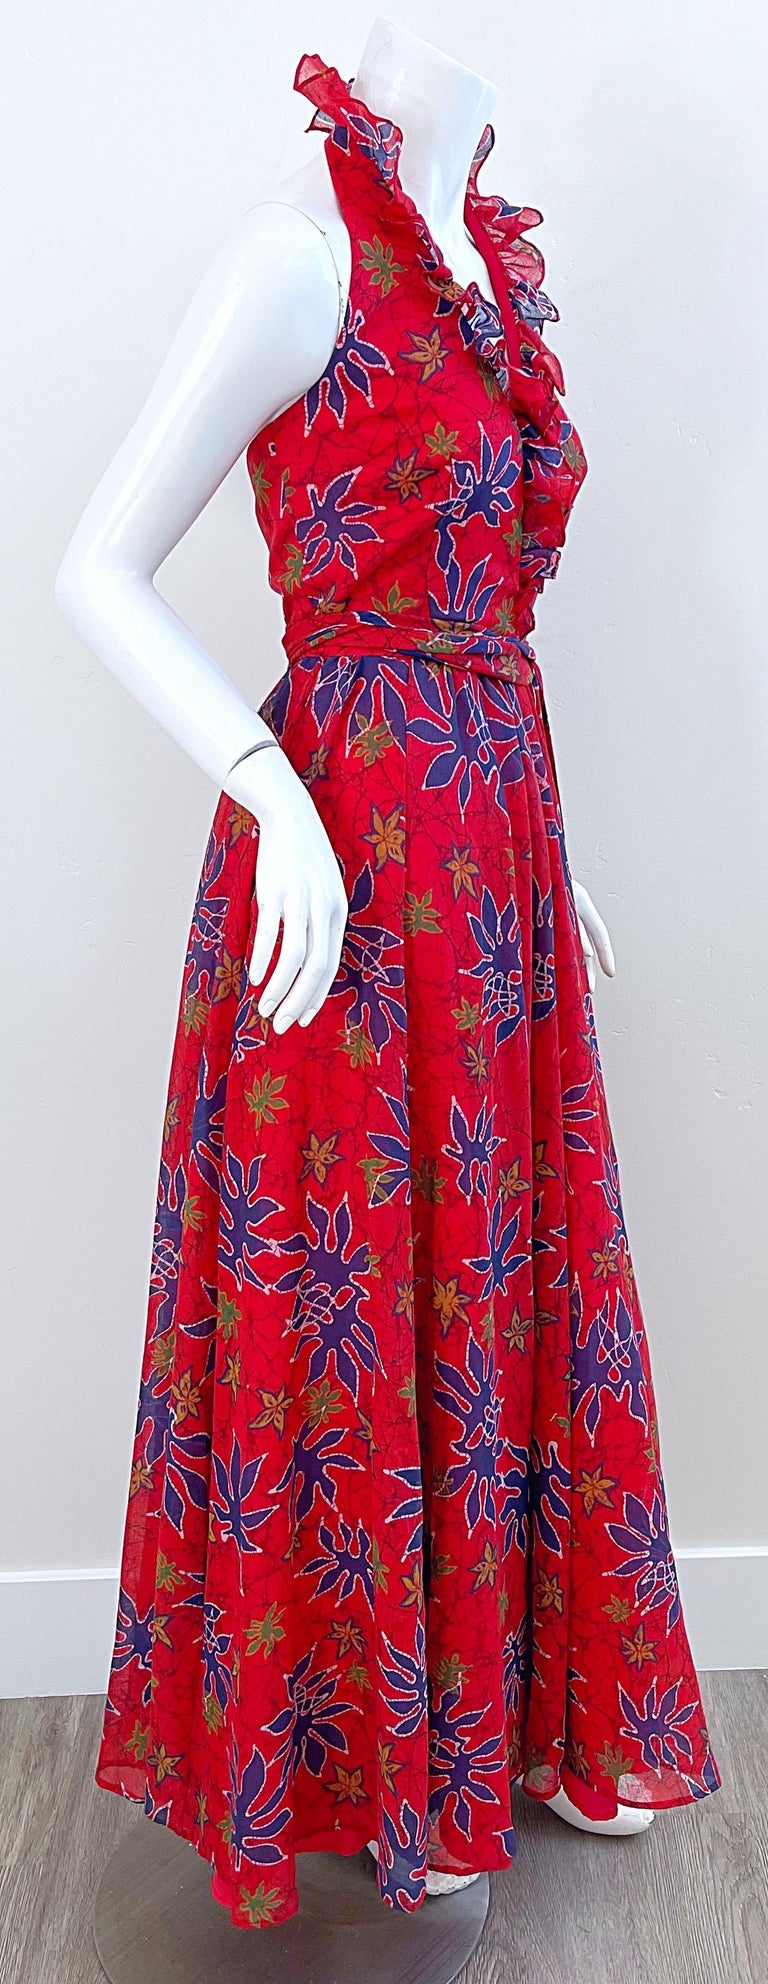 Lilli Diamond 1970s Sz 2 Abstract Leaf Print Red Halter Cotton Voile Maxi Dress For Sale 5